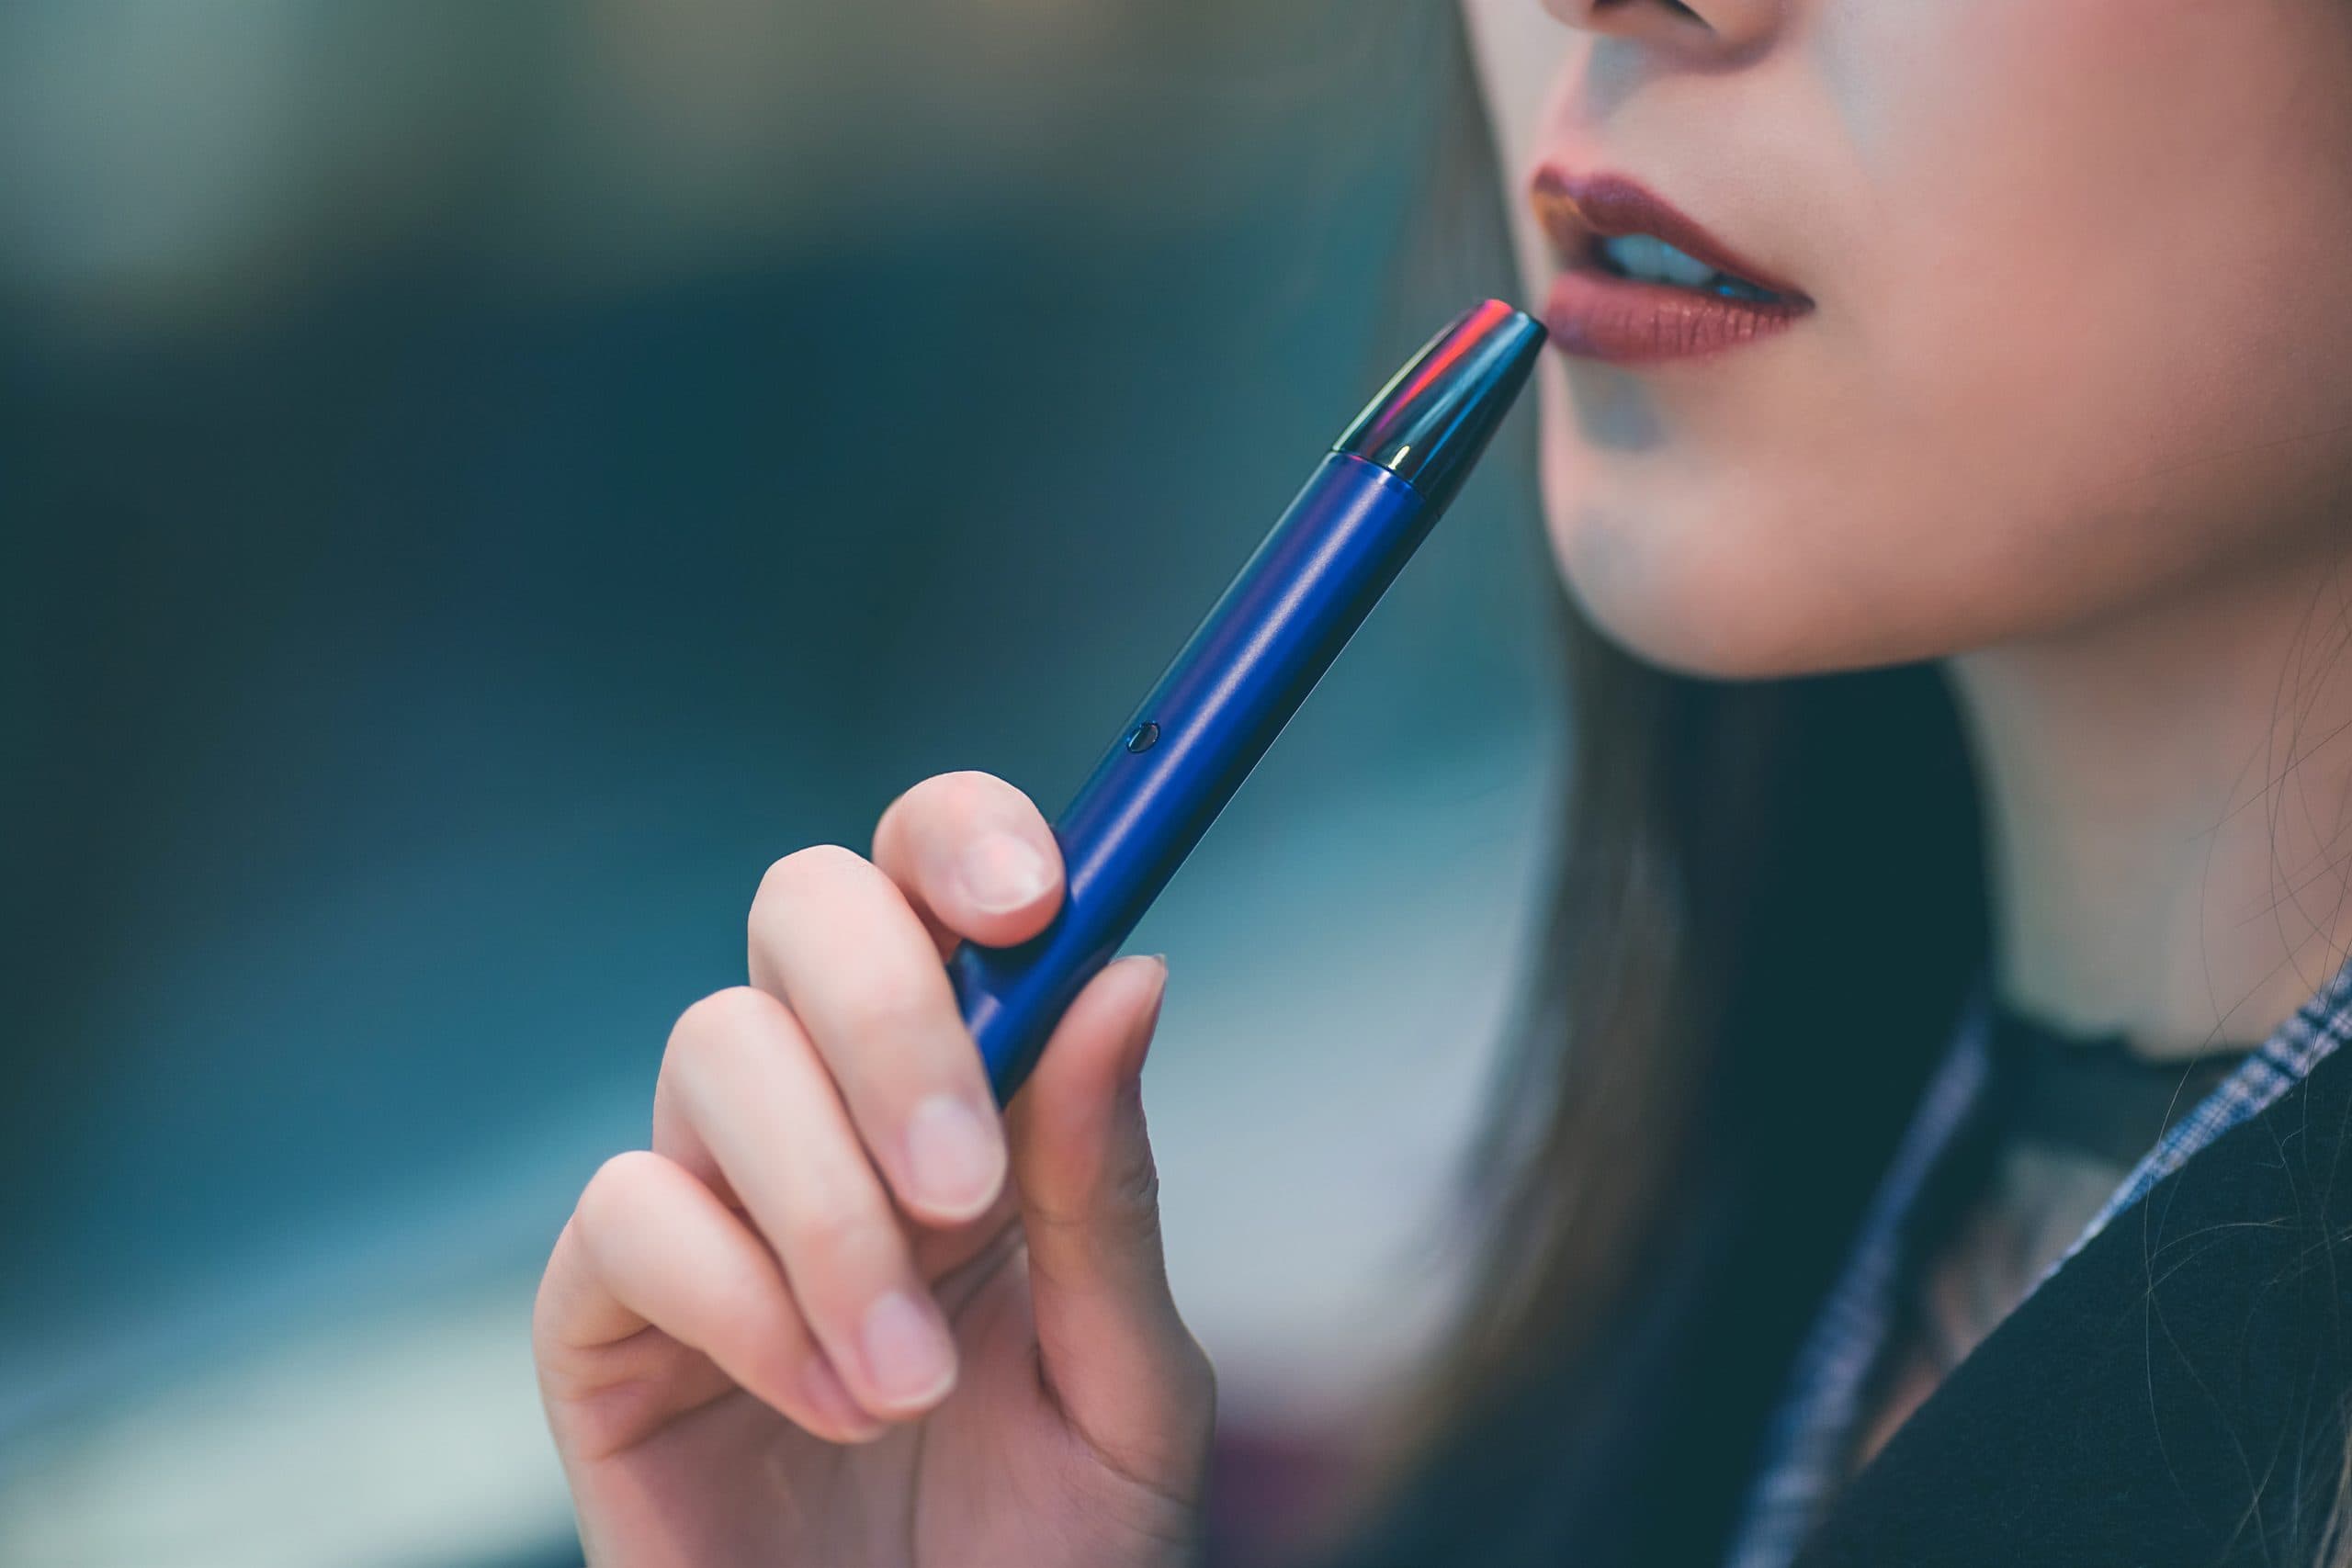 Why is dry herb vaporizer better than smoking?